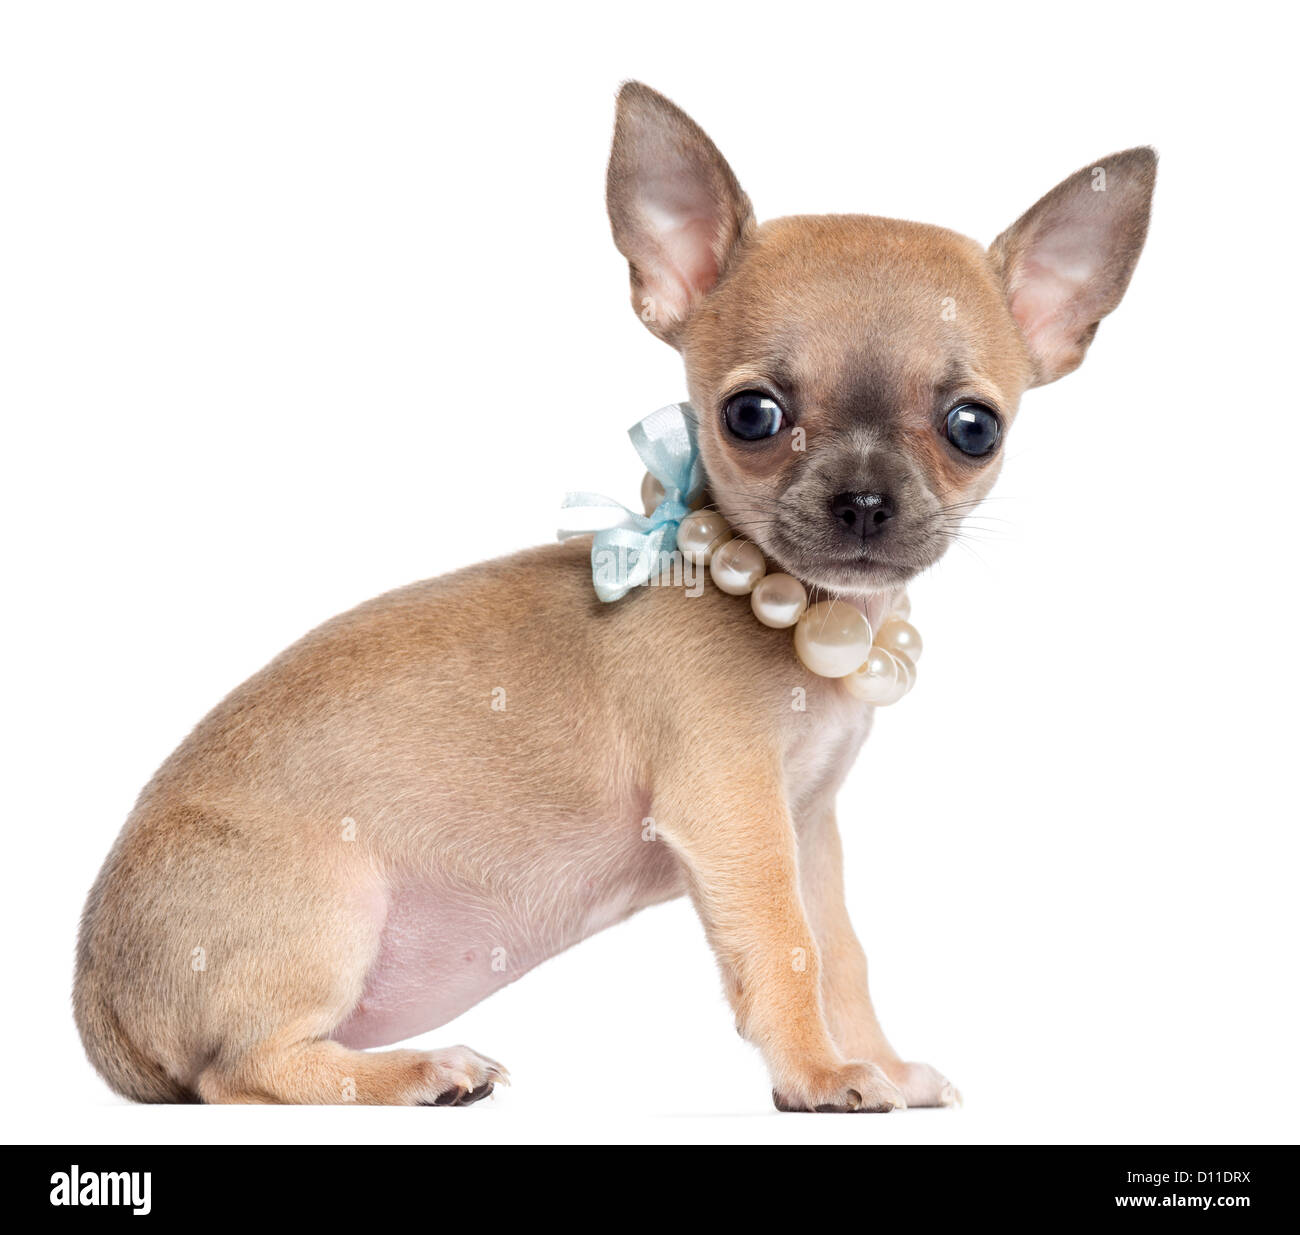 Chihuahua puppy, 4 months old, wearing a pearl necklace and looking at the camera against white background Stock Photo